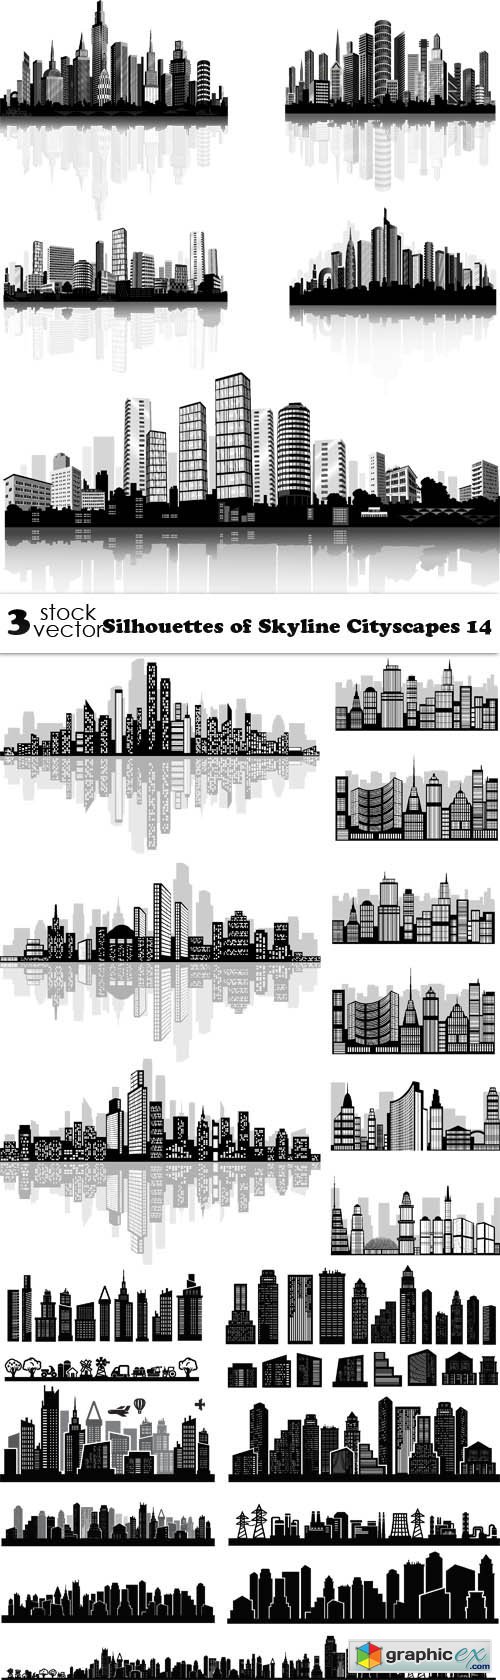 Silhouettes of Skyline Cityscapes 14